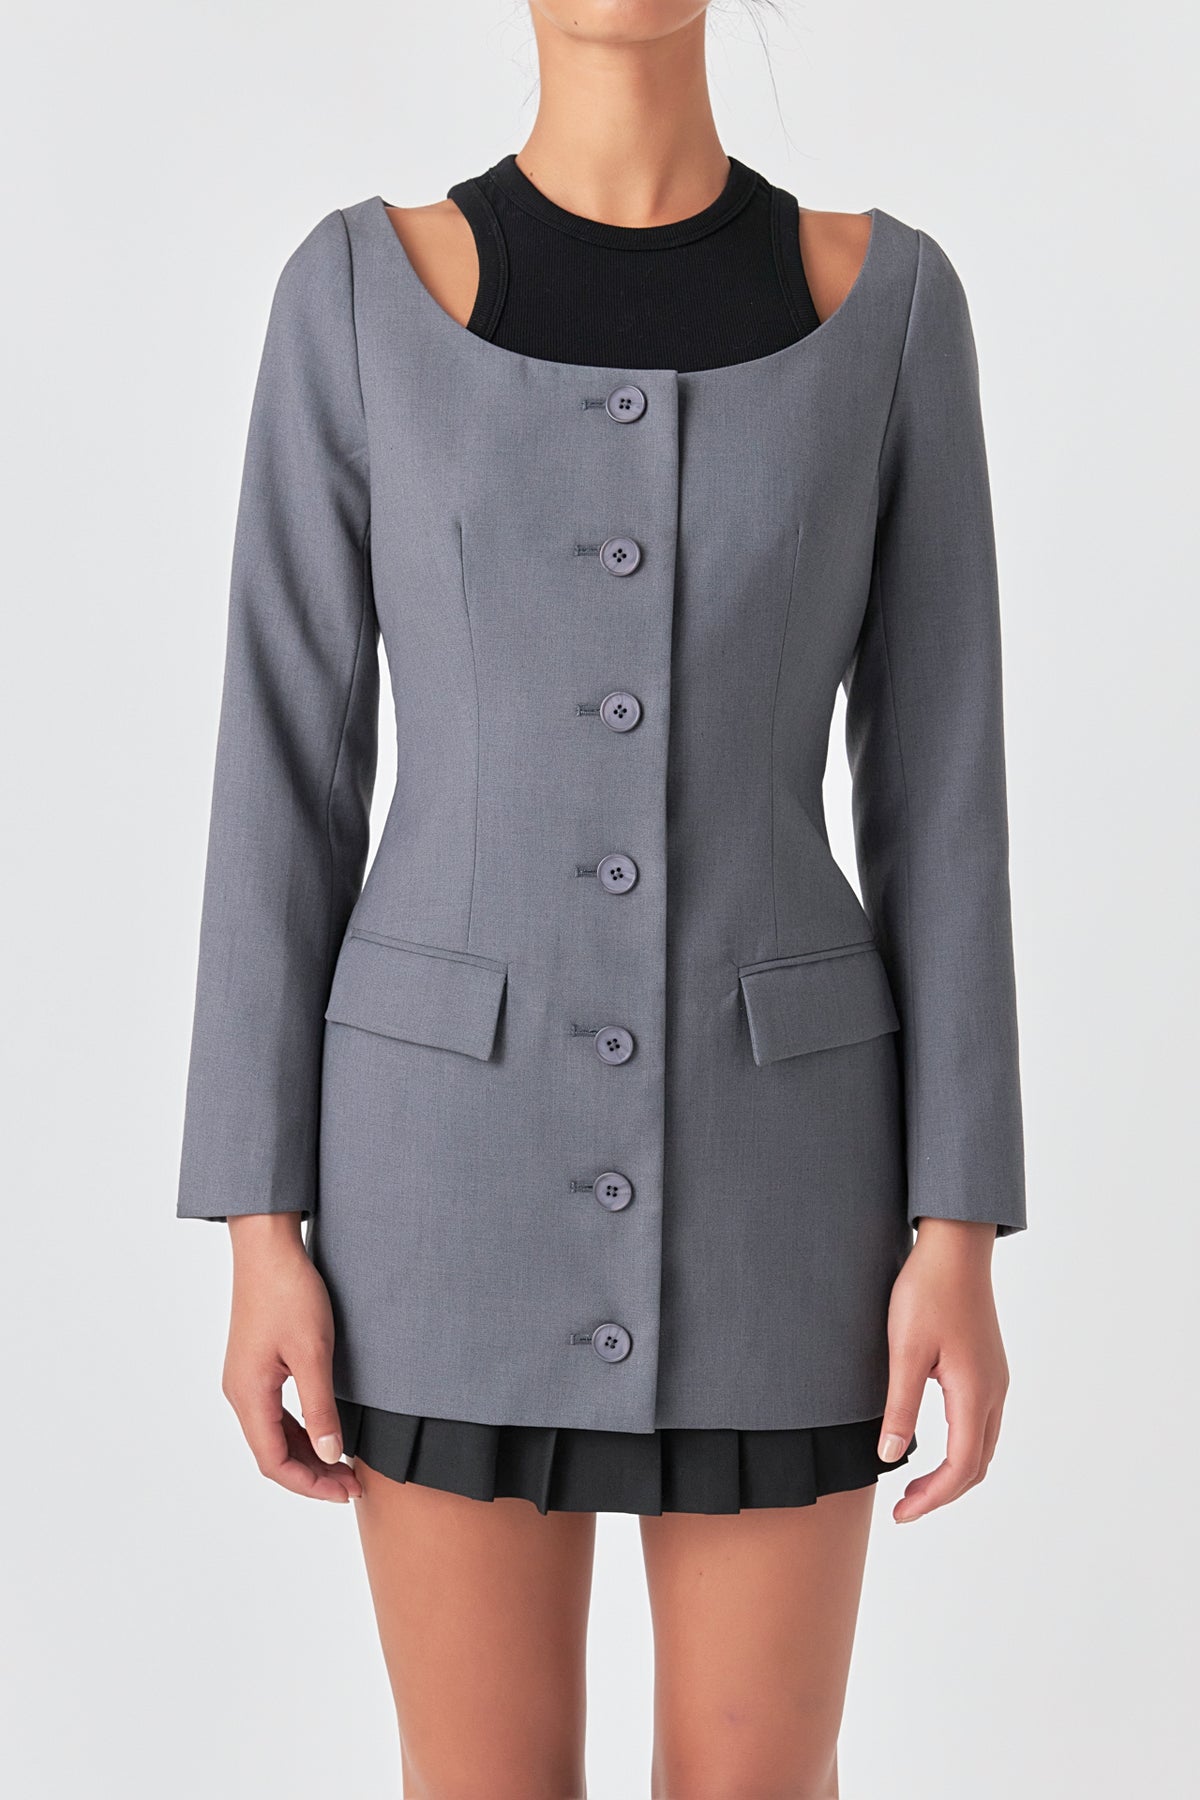 GREY LAB - Off the Shoulder Blazer - BLAZERS available at Objectrare